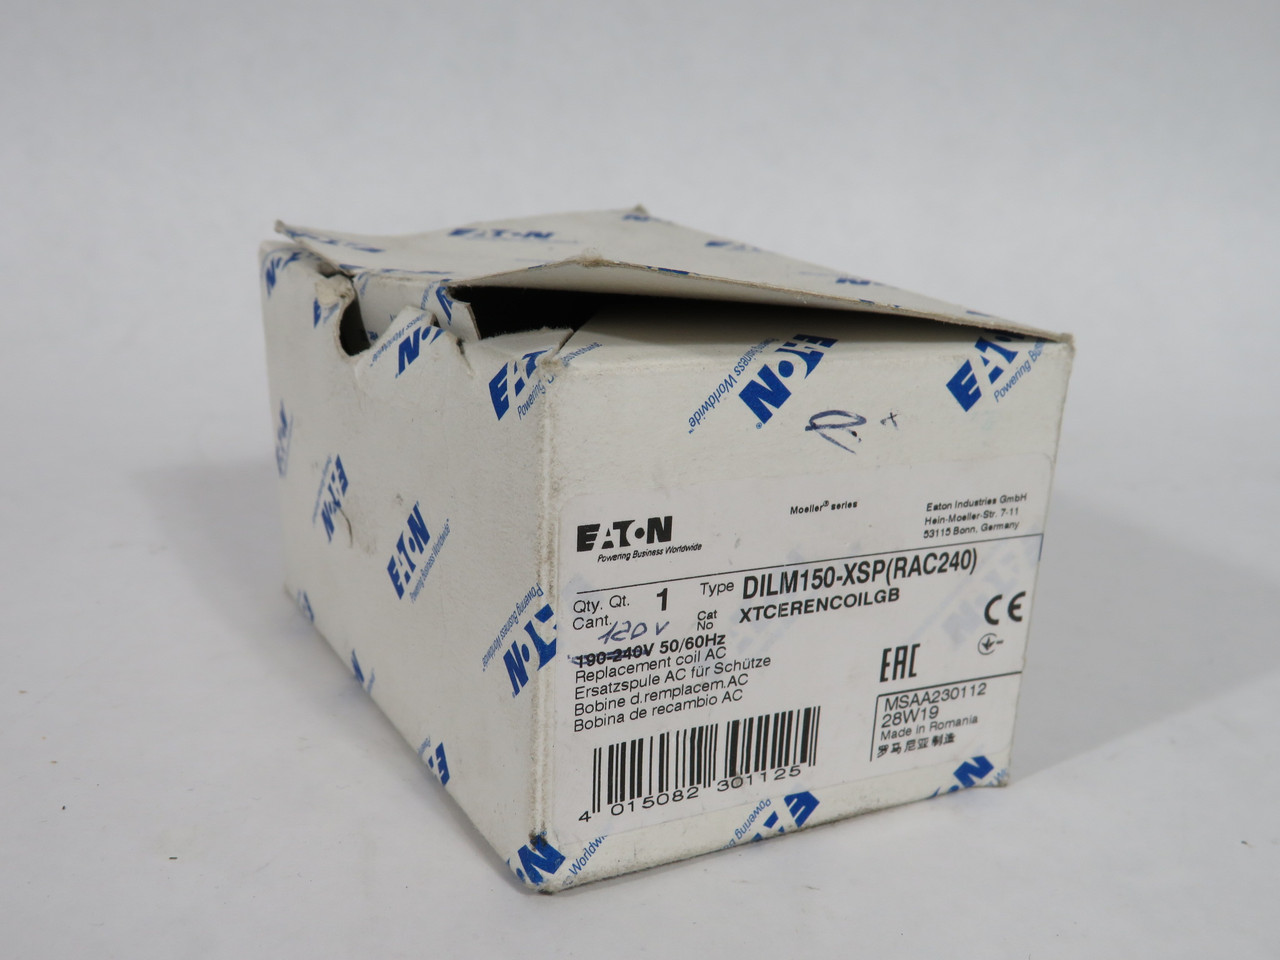 Eaton DILM150-XSP(RAC120) XTCERENCOILGA Replacement Coil 120V 50/60Hz NOP